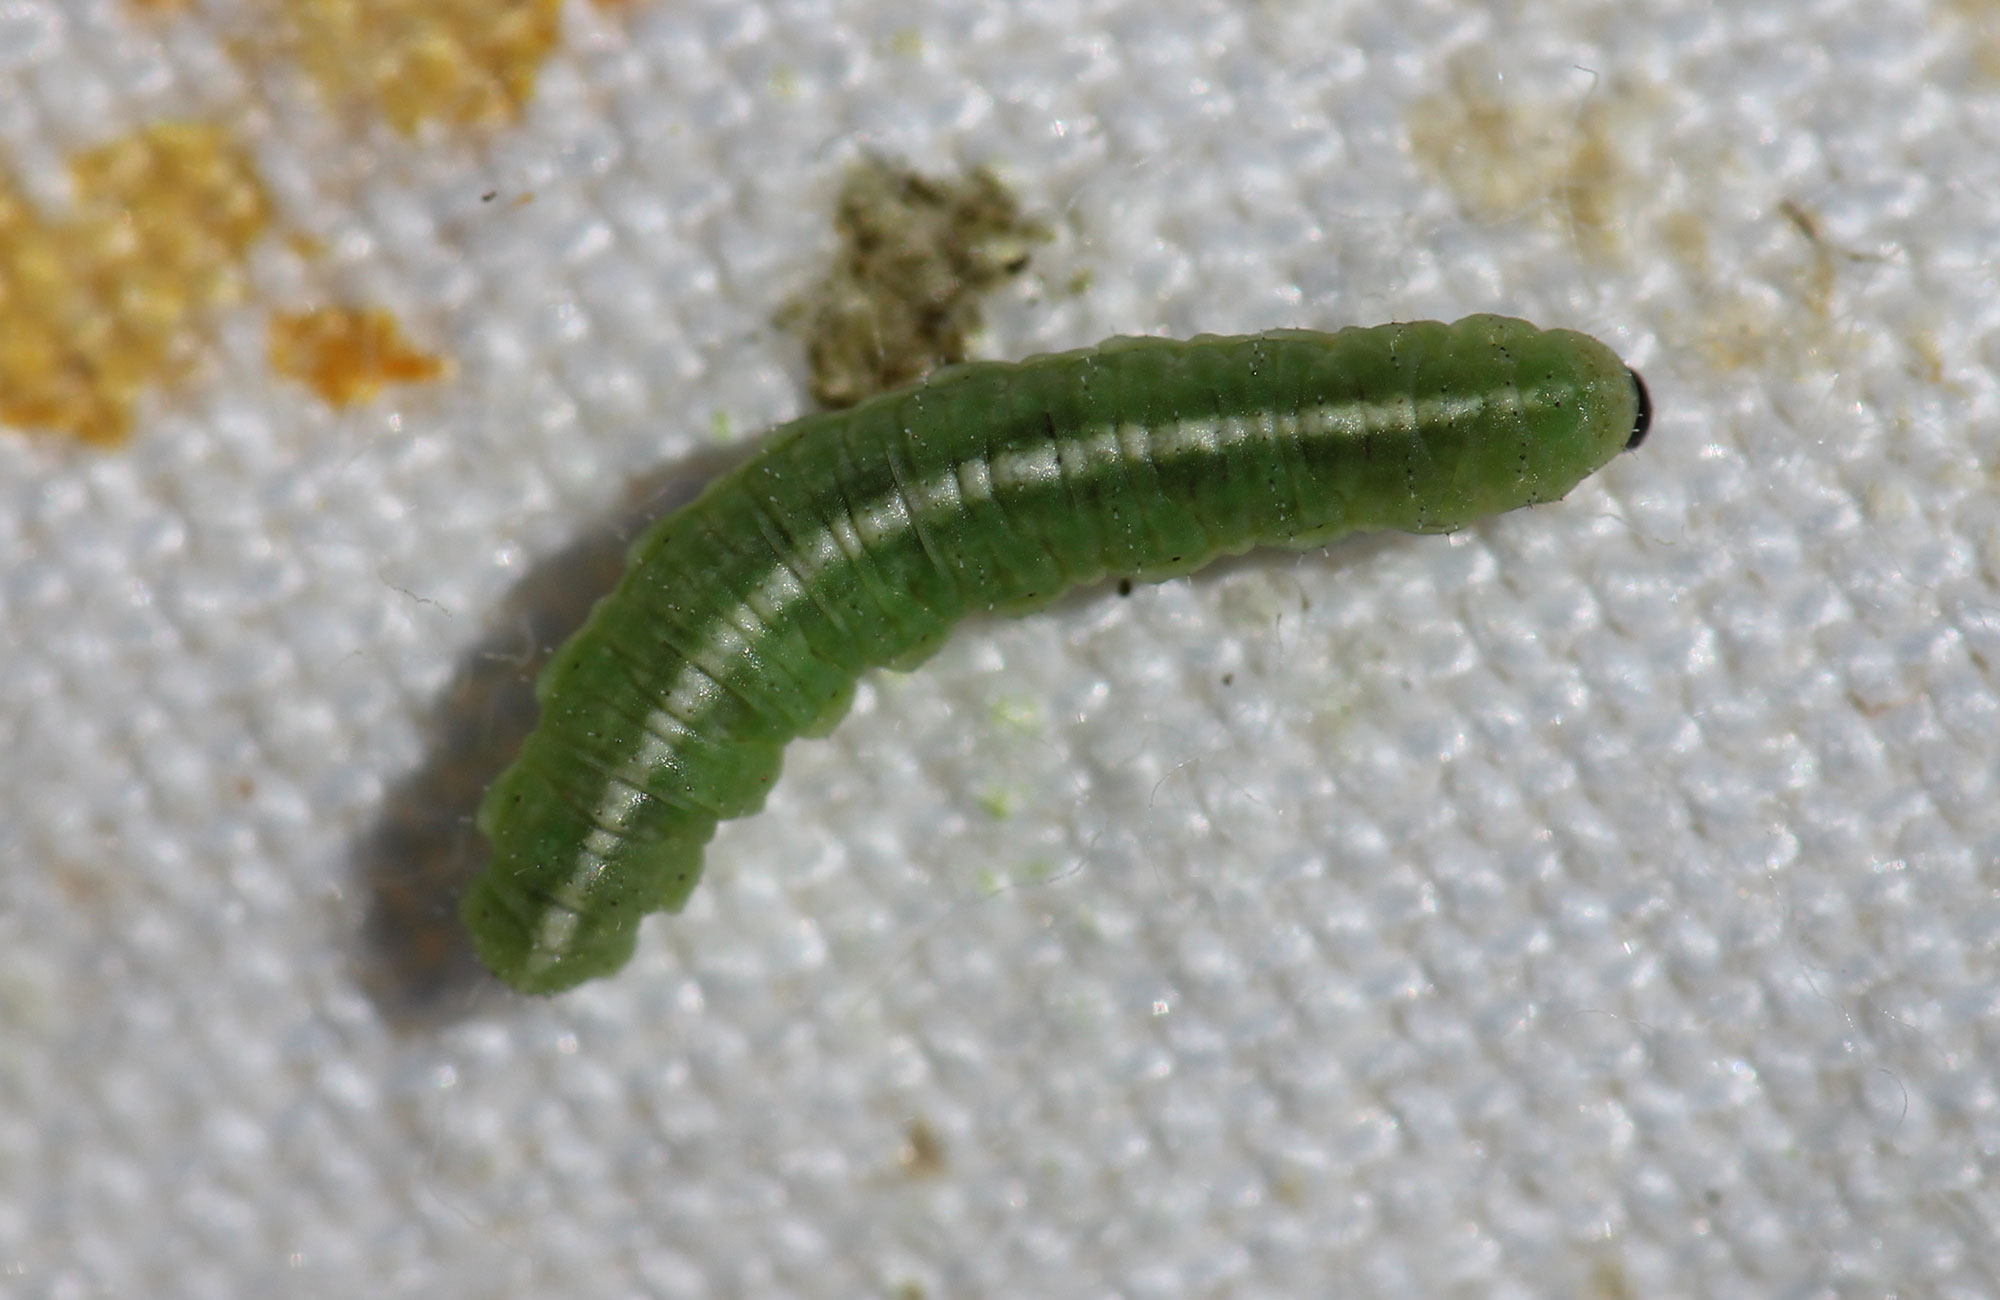 Green beetle larvae with a white stripe running down its body.